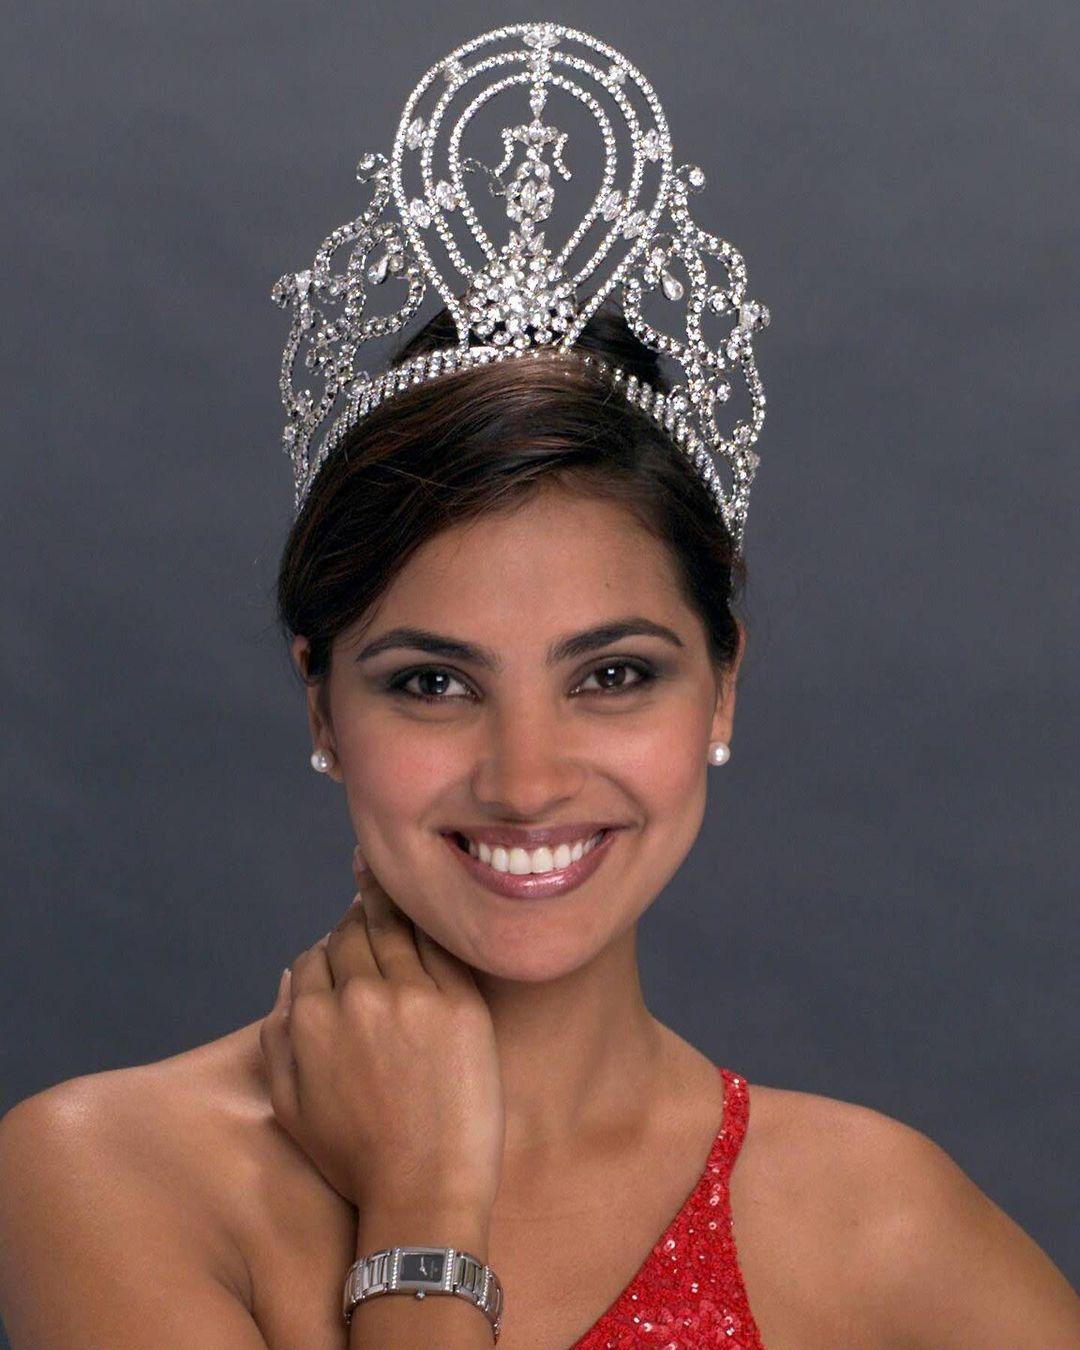 Lara Dutta shot to fame after she won Miss Universe in 2000. She was the second Indian to win it, with the first being Sushmita Sen in 1994.